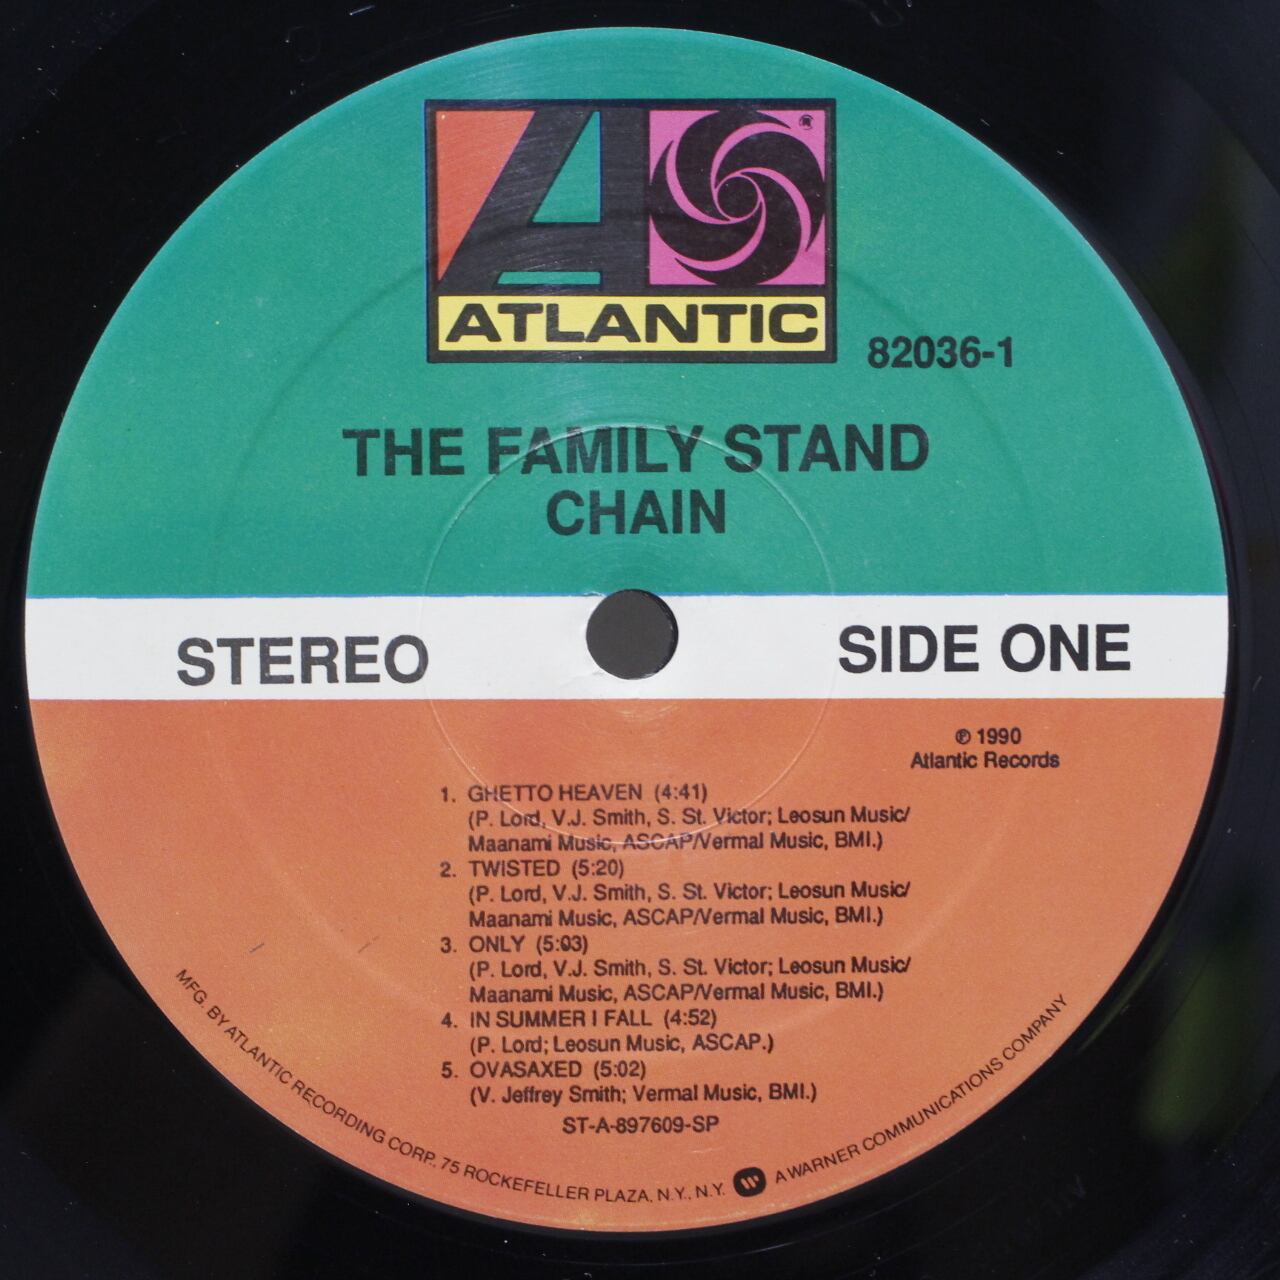 The Family Stand / Chain [7567-82036-1] - 画像3